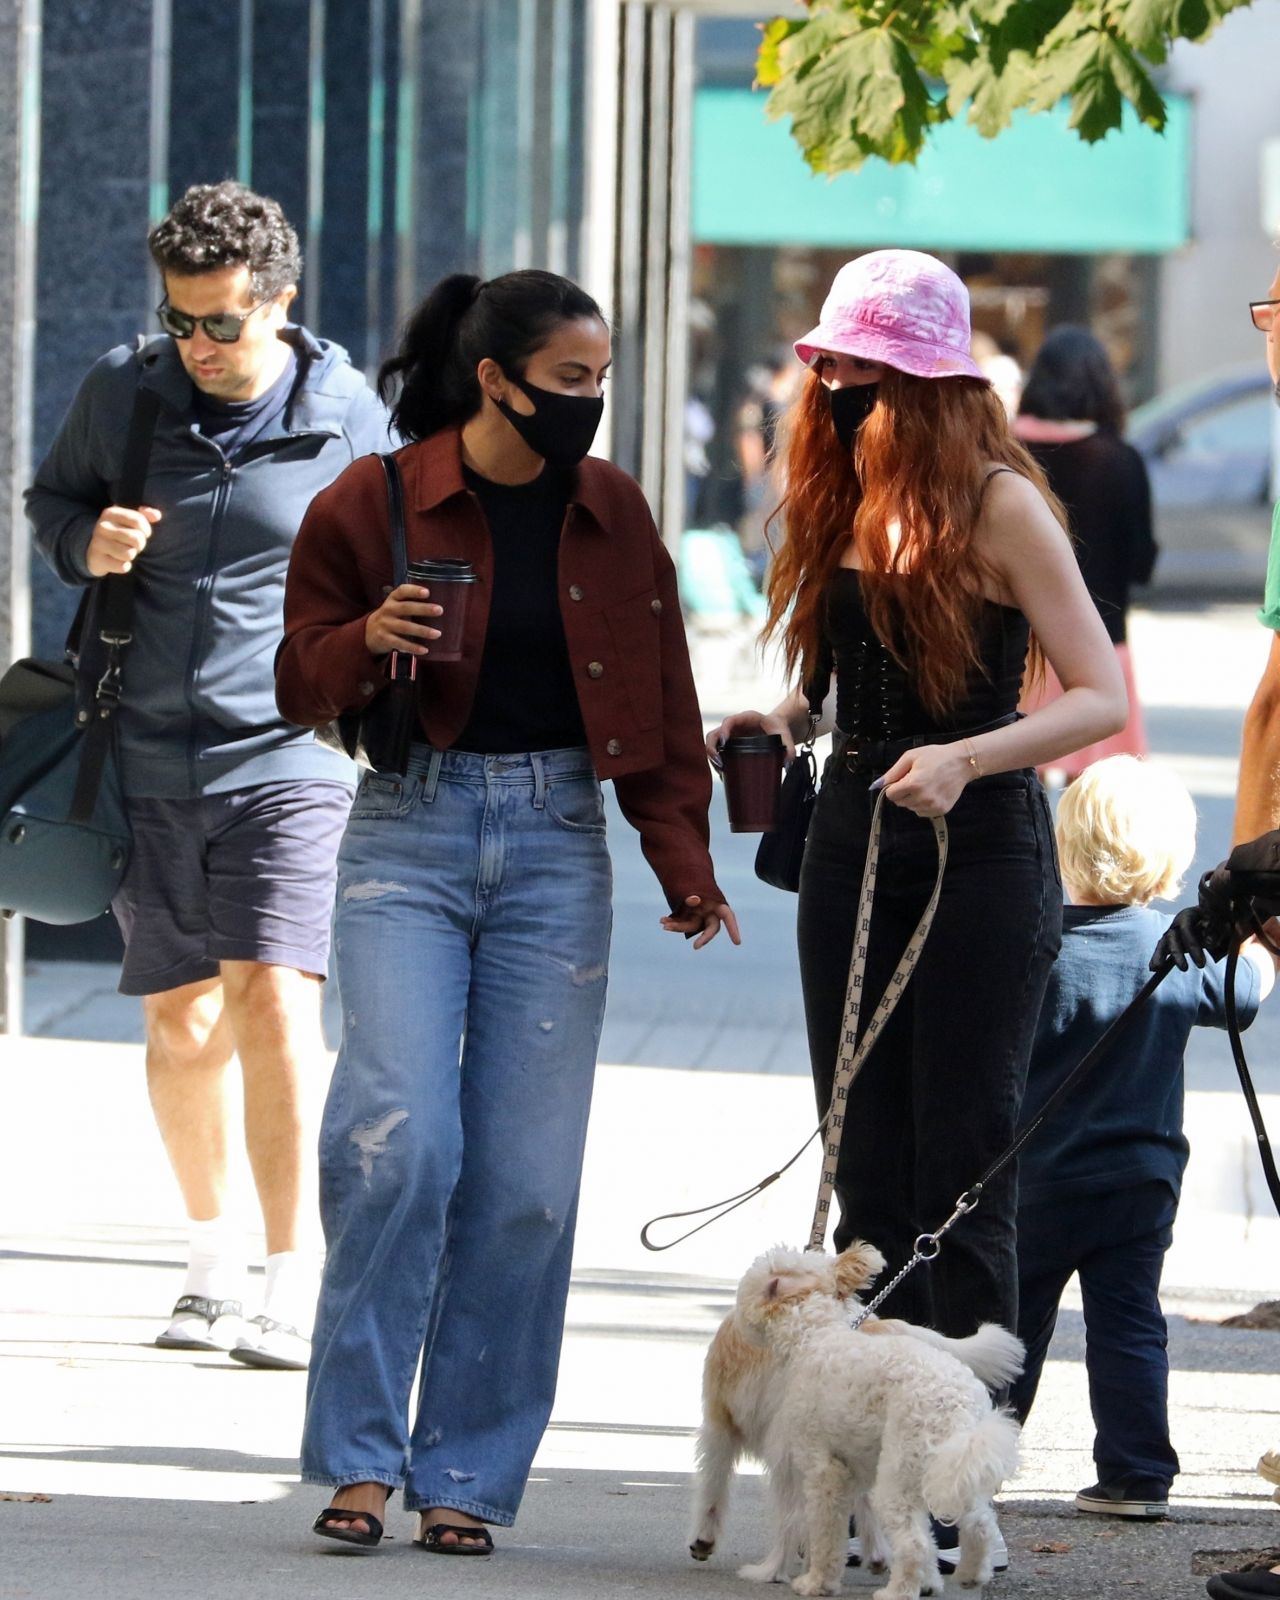 camila-mendes-and-madelaine-petsch-out-in-vancouver-09-06-2020-2.jpg